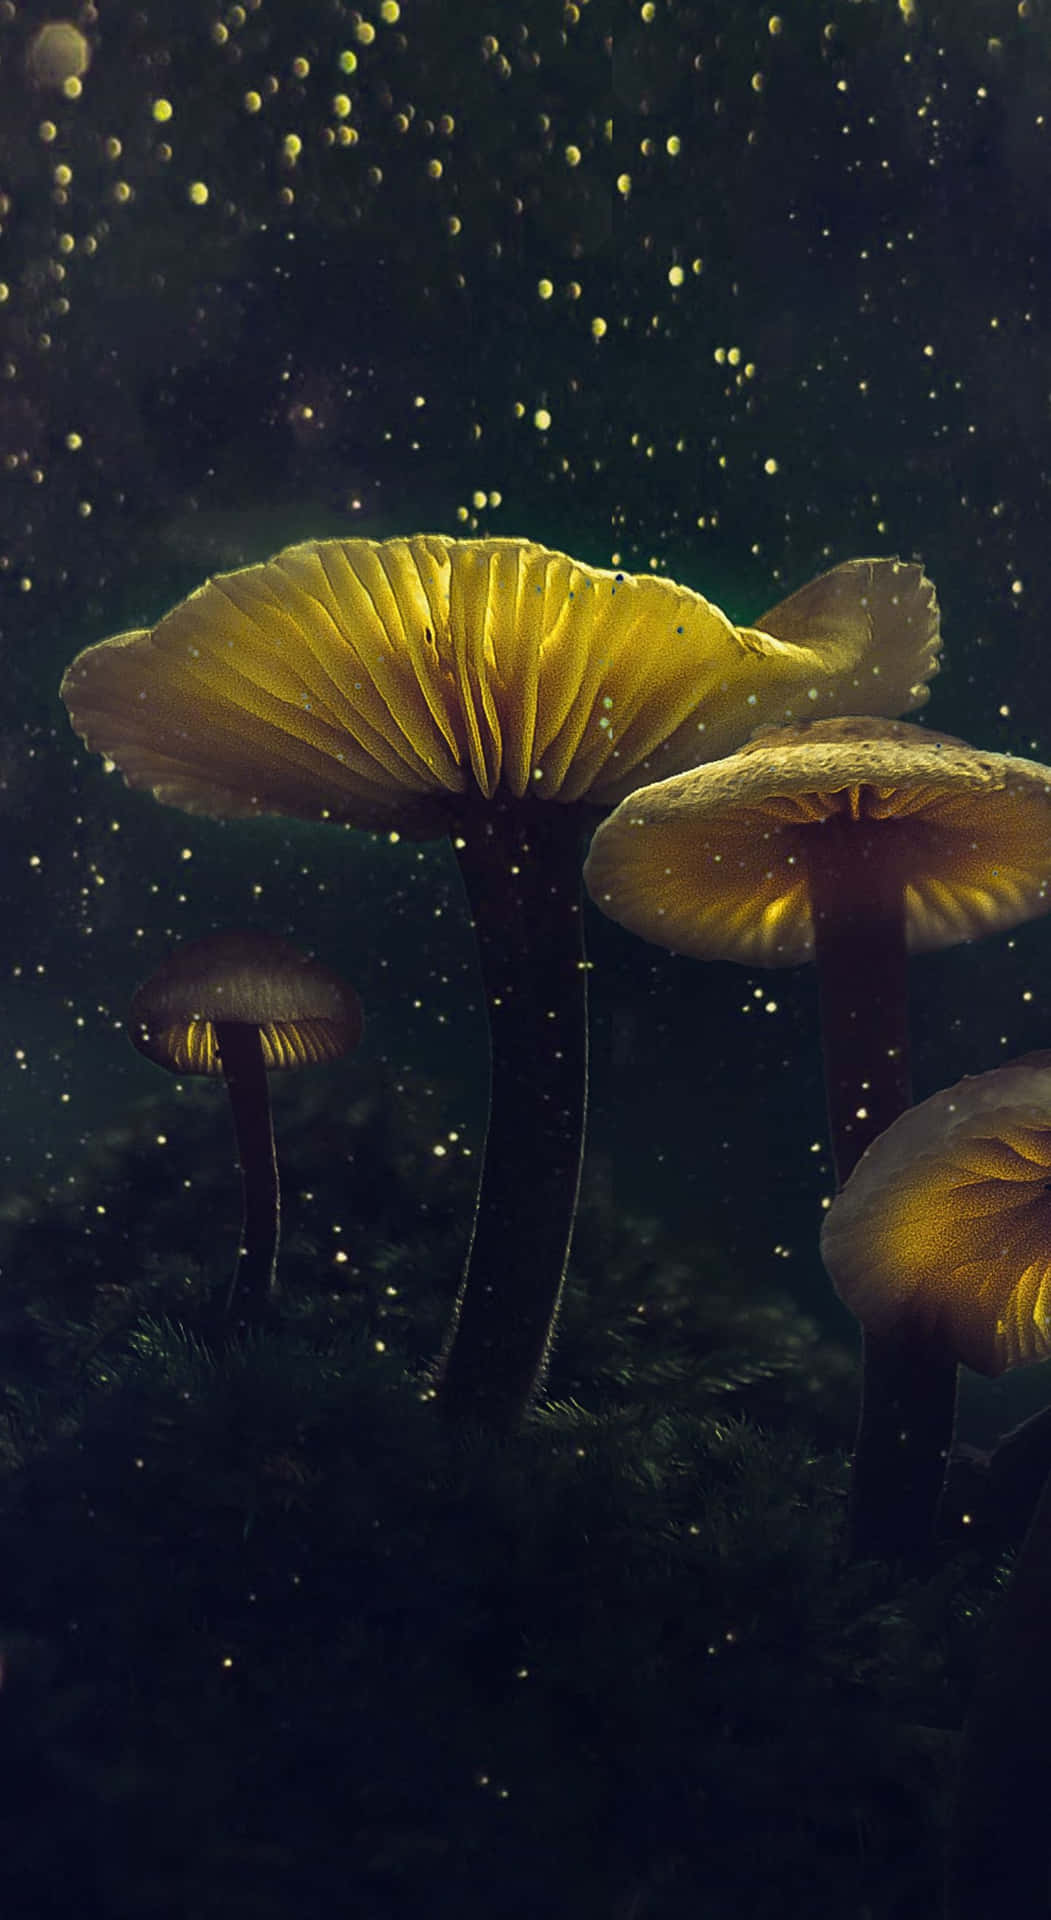 A Group Of Mushrooms In The Dark With Stars Wallpaper